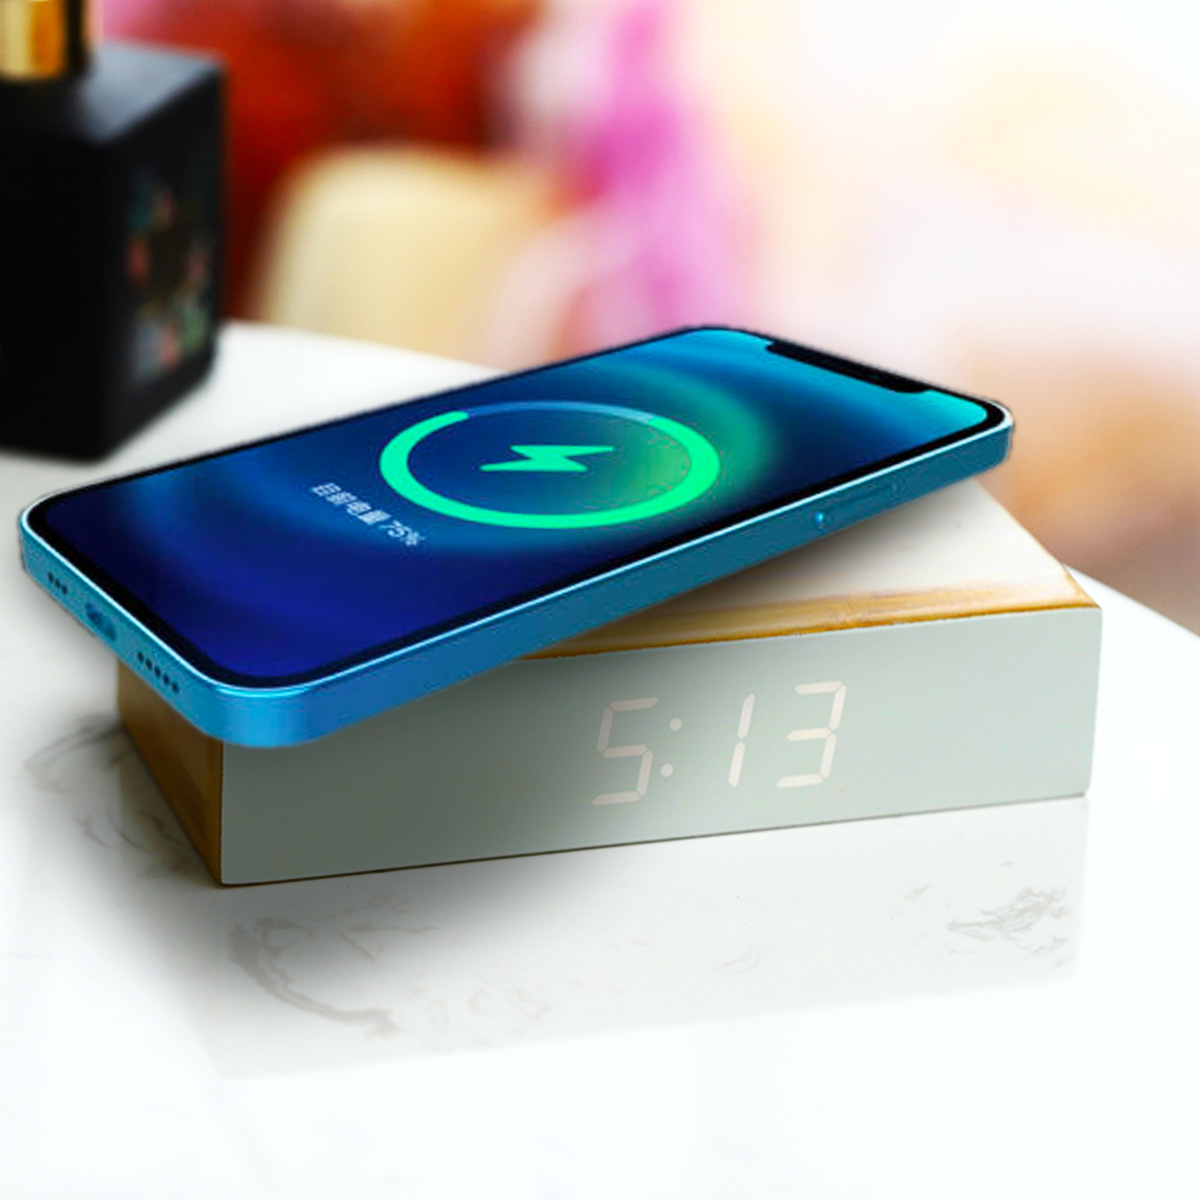 Bamboo Alarm Clock with Wireless Charger